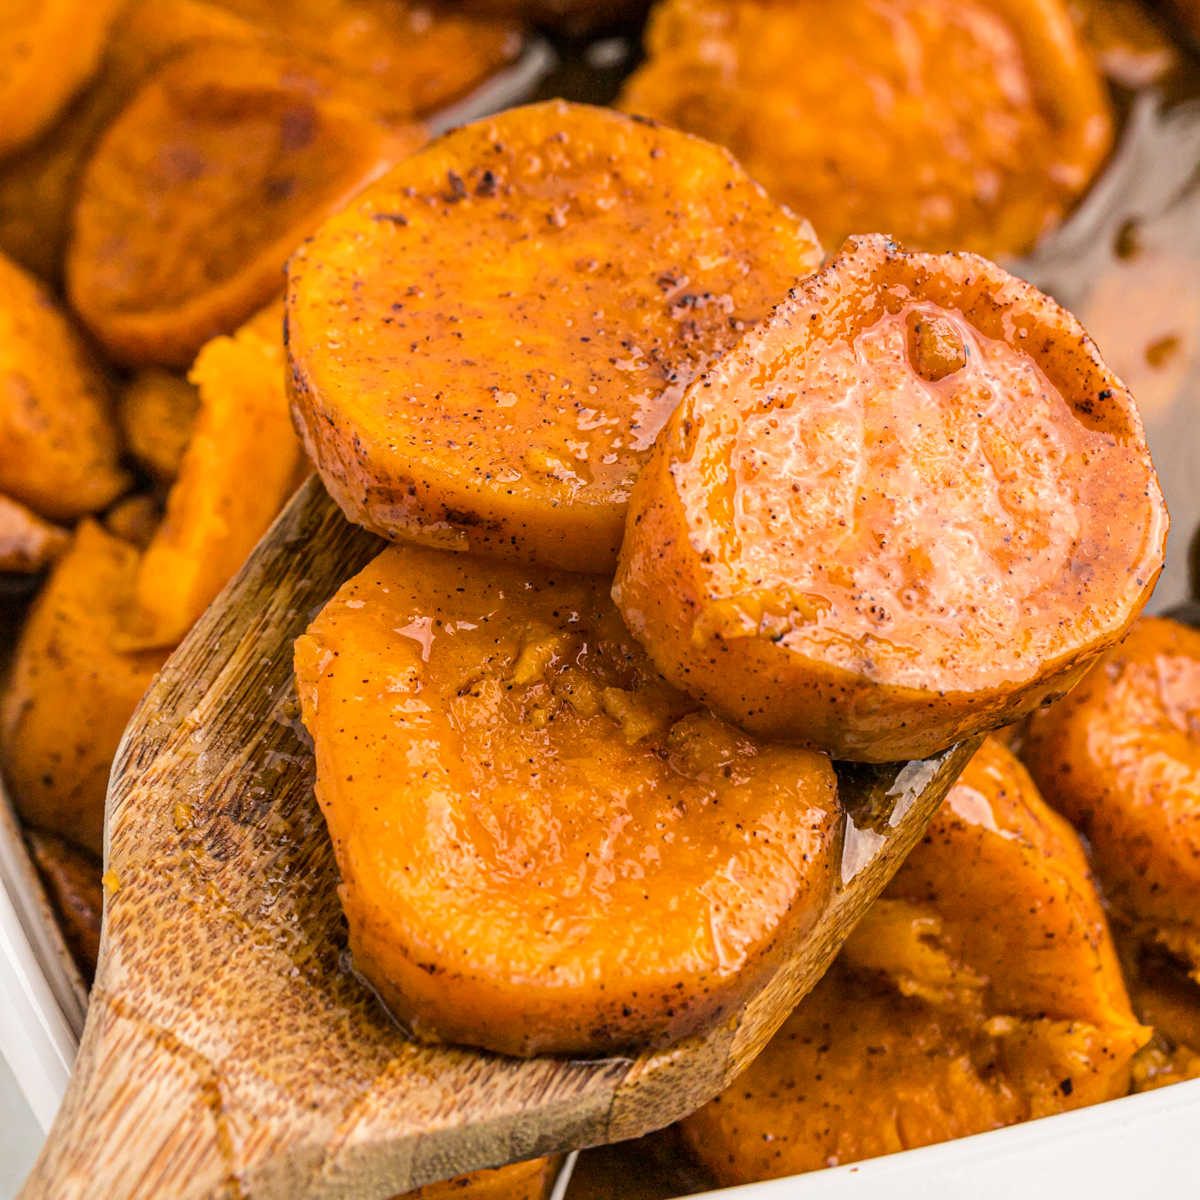 Candied Sweet Potatoes Recipe - Eating on a Dime